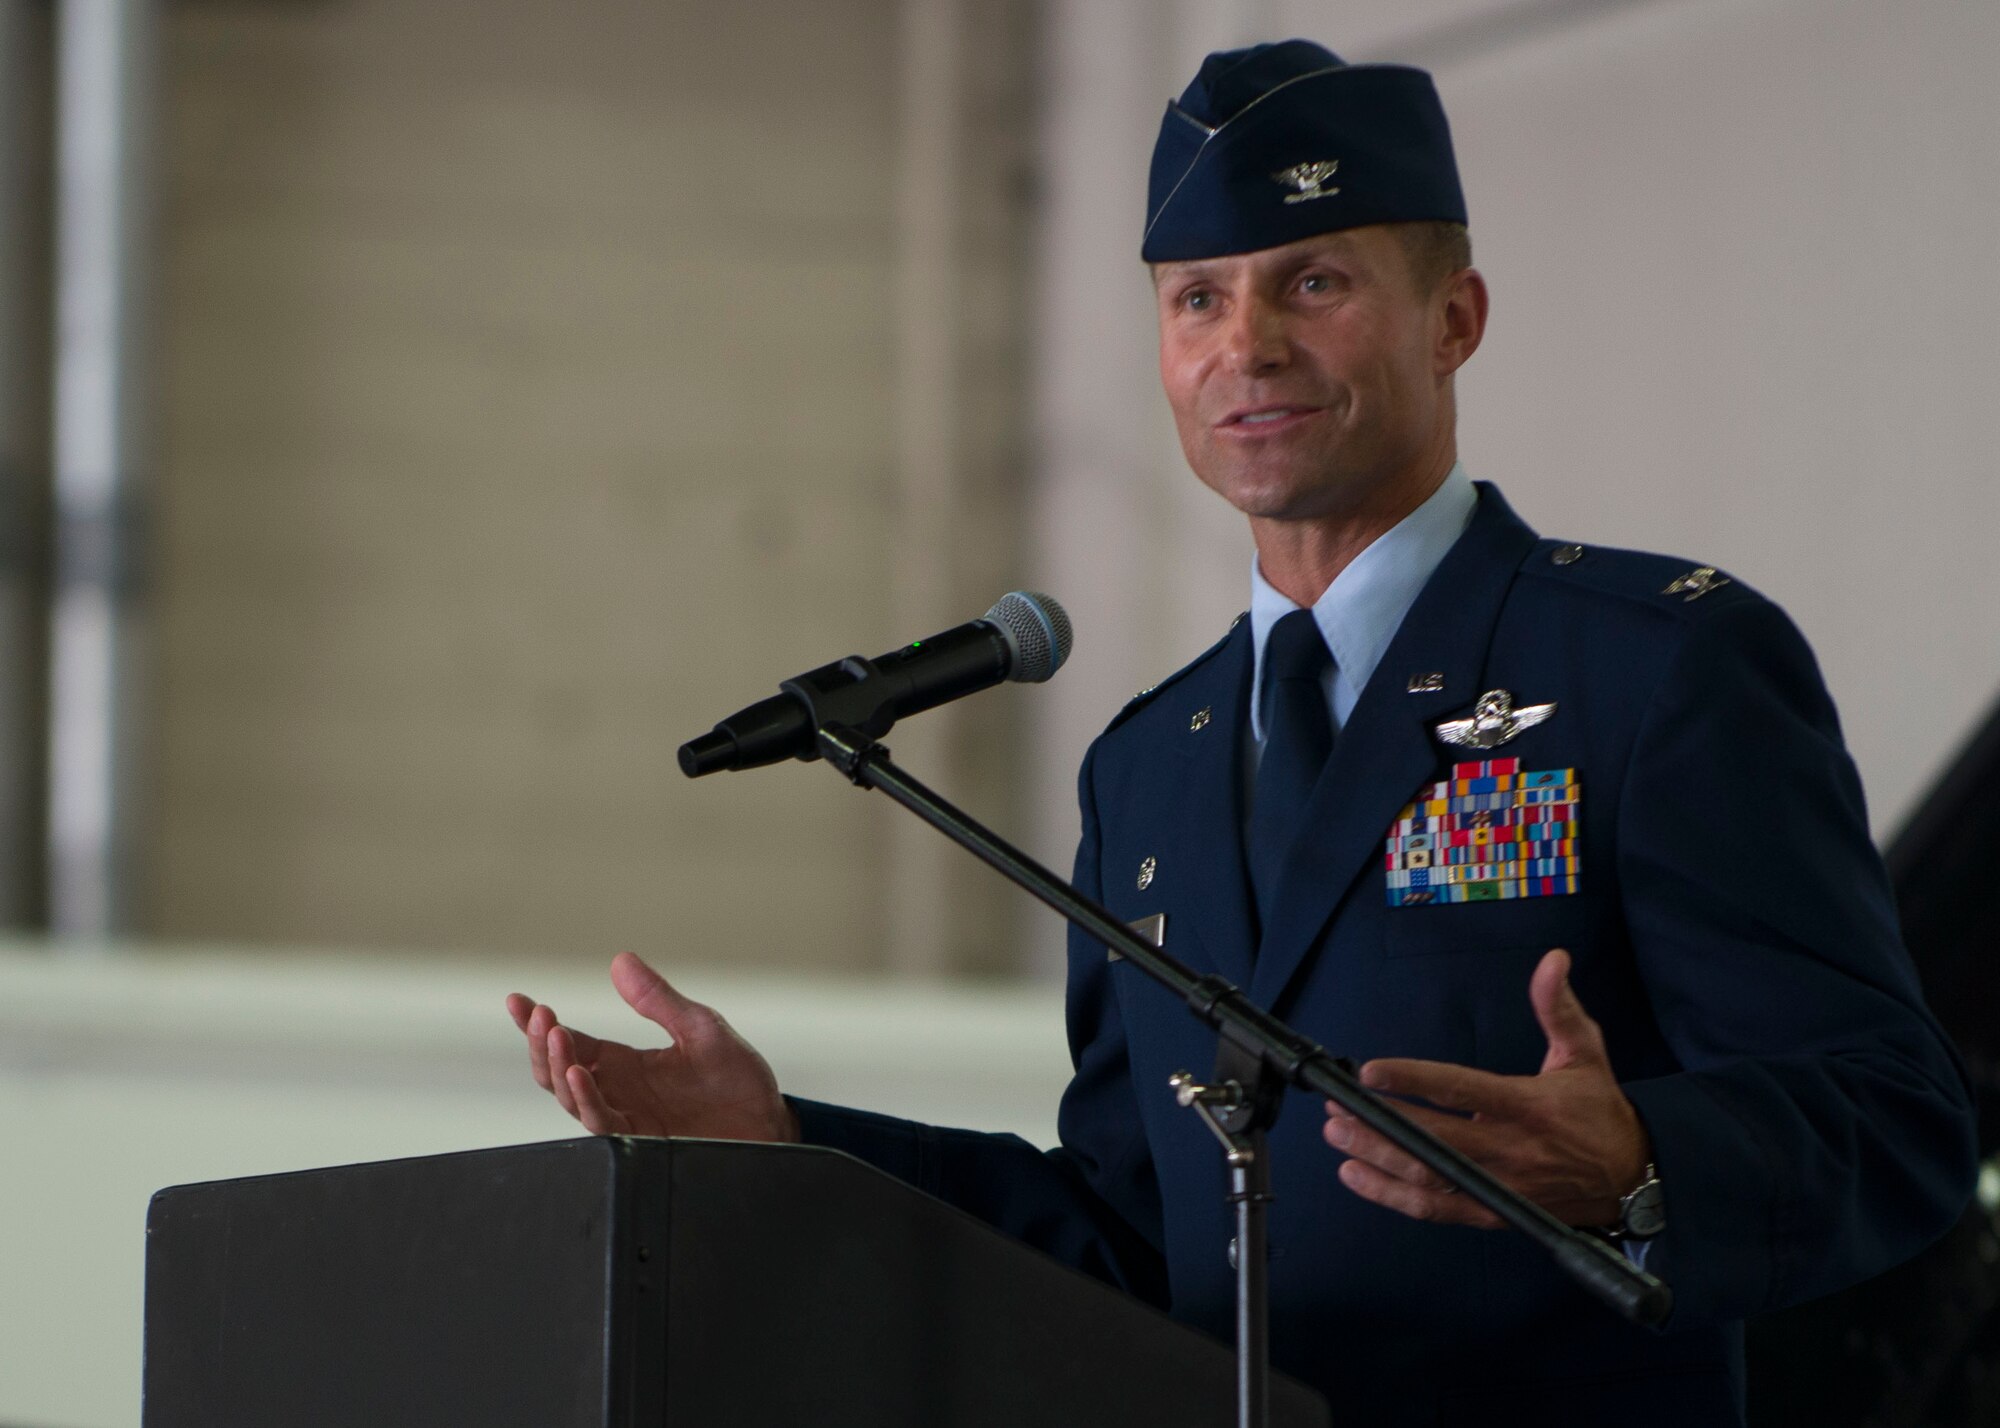 U.S. Air Force Col. Larry Broadwell, 1st Operations Group commander, speaks during the 71st Fighter Squadron reactivation ceremony at Langley Air Force Base, Va., Aug. 21, 2015. The 71st FS, now designated the 71st Fighter Training Squadron, will conduct adversarial air support, or “red air,” for 1st Fighter Wing F-22 Raptor pilots and leverage its 17 T-38 Talon aircraft to provide realistic training scenarios. (U.S. Air Force photo by Staff Sgt. John D. Strong II/Released)